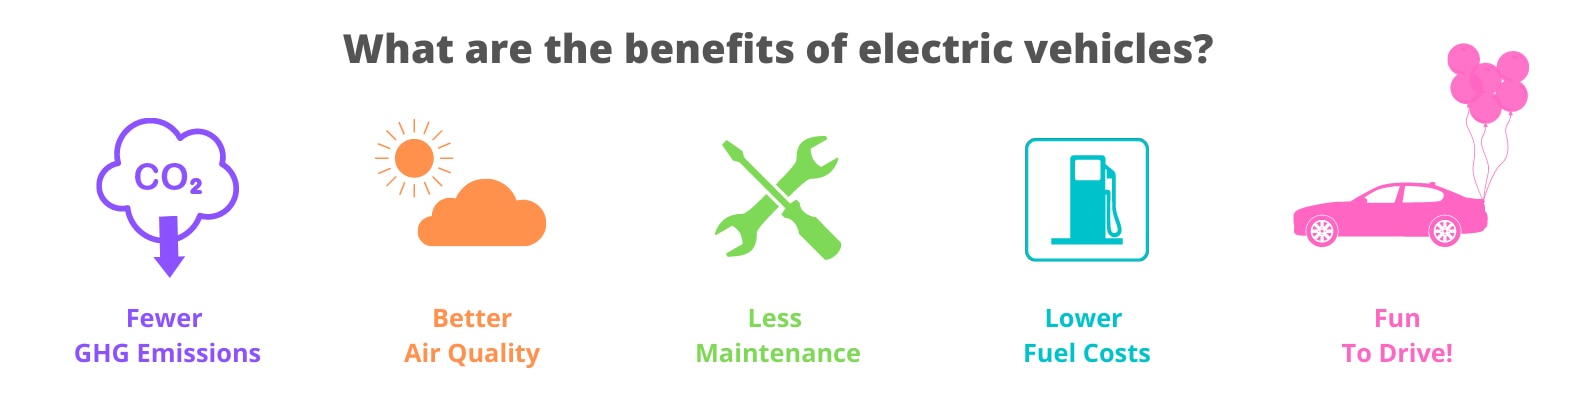 Benefits of Electric Vehicles Infographic